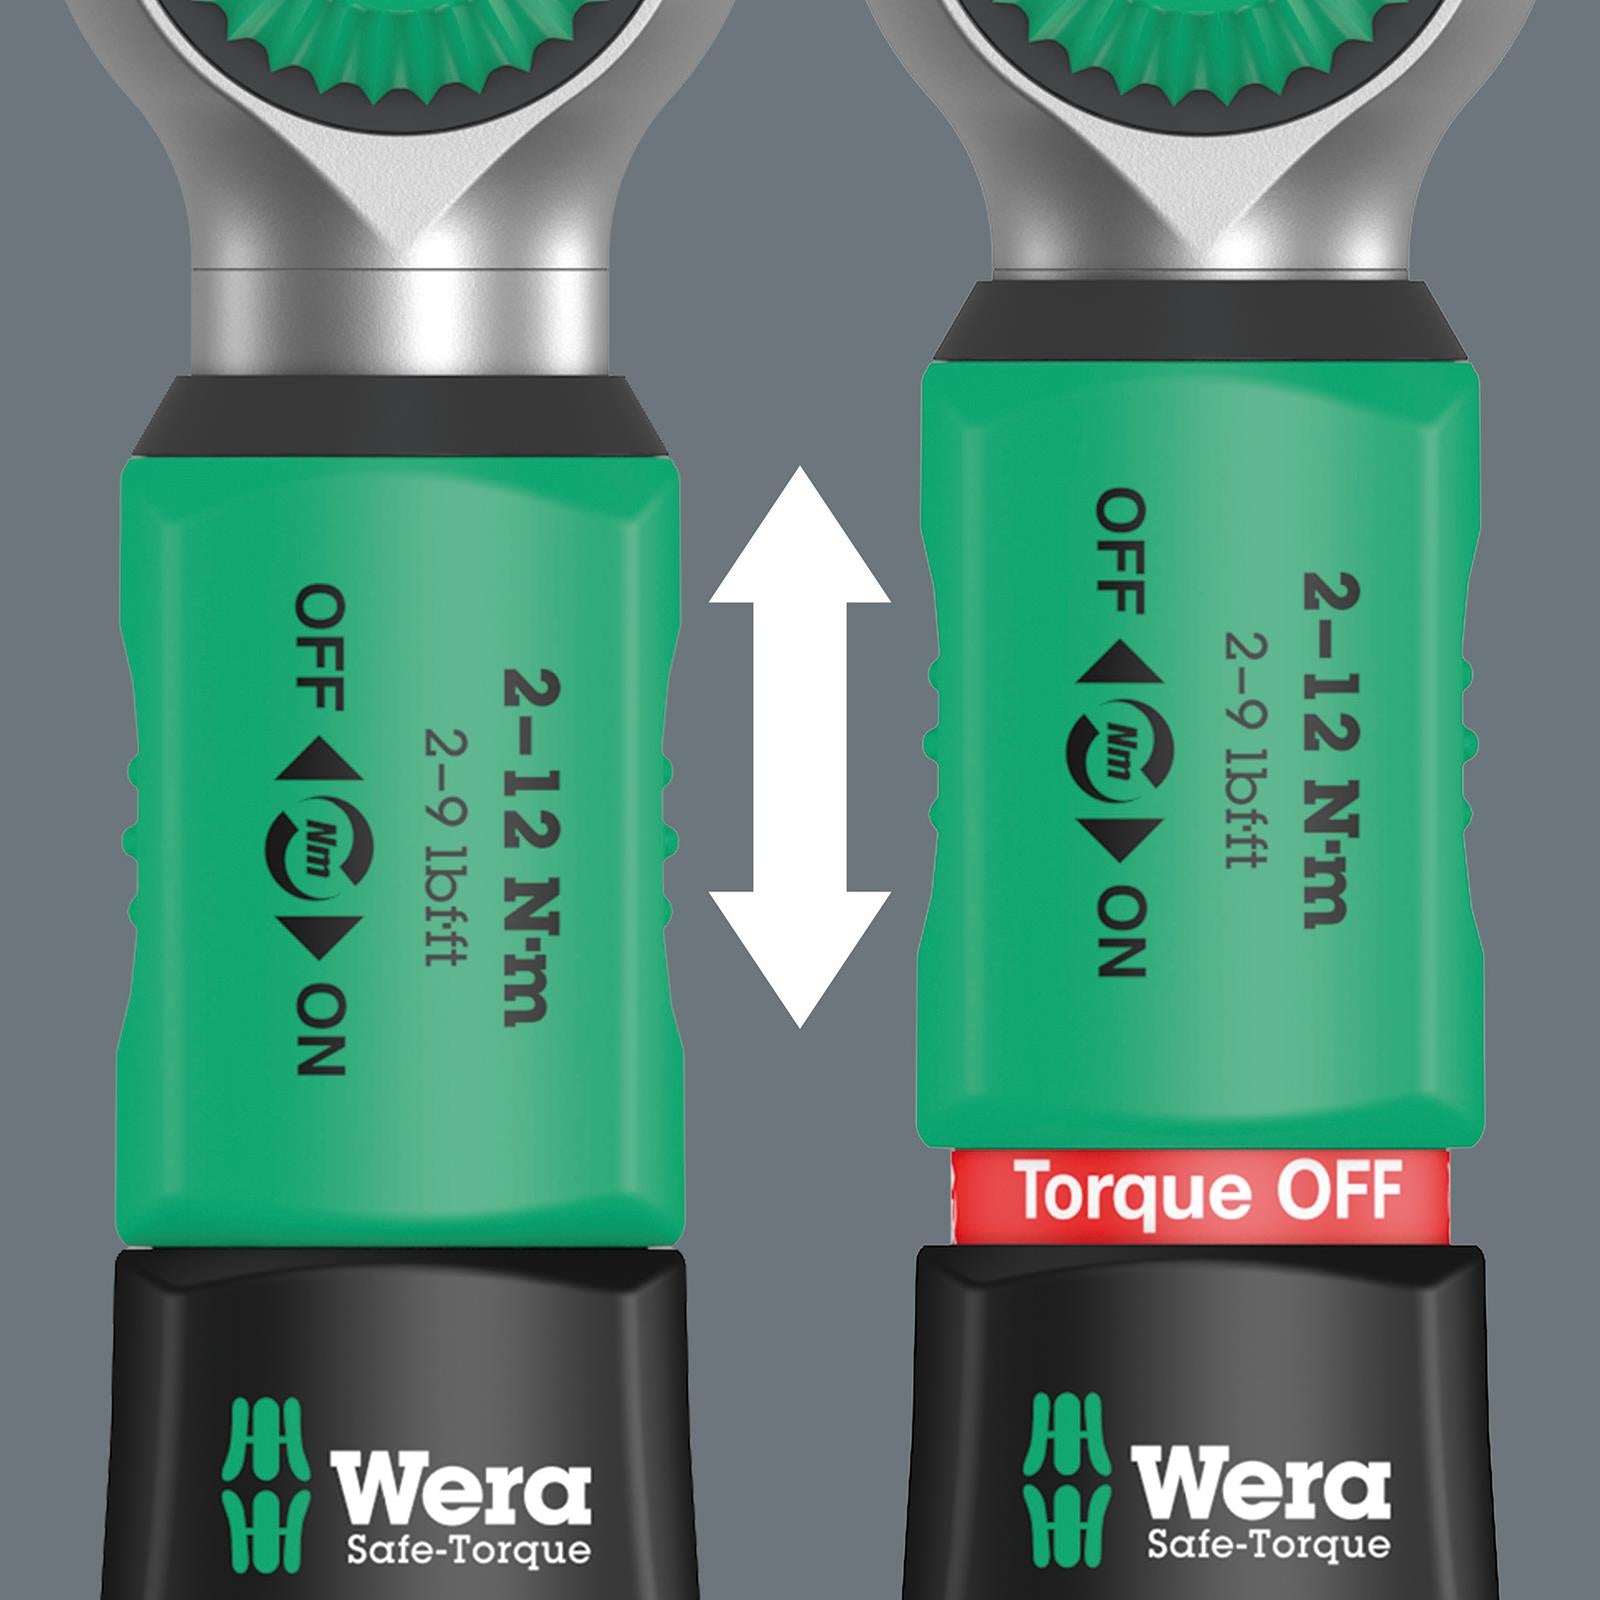 Wera Torque Wrench Safe-Torque A 2 1/4" Hex Drive 2-12 Nm Reversible